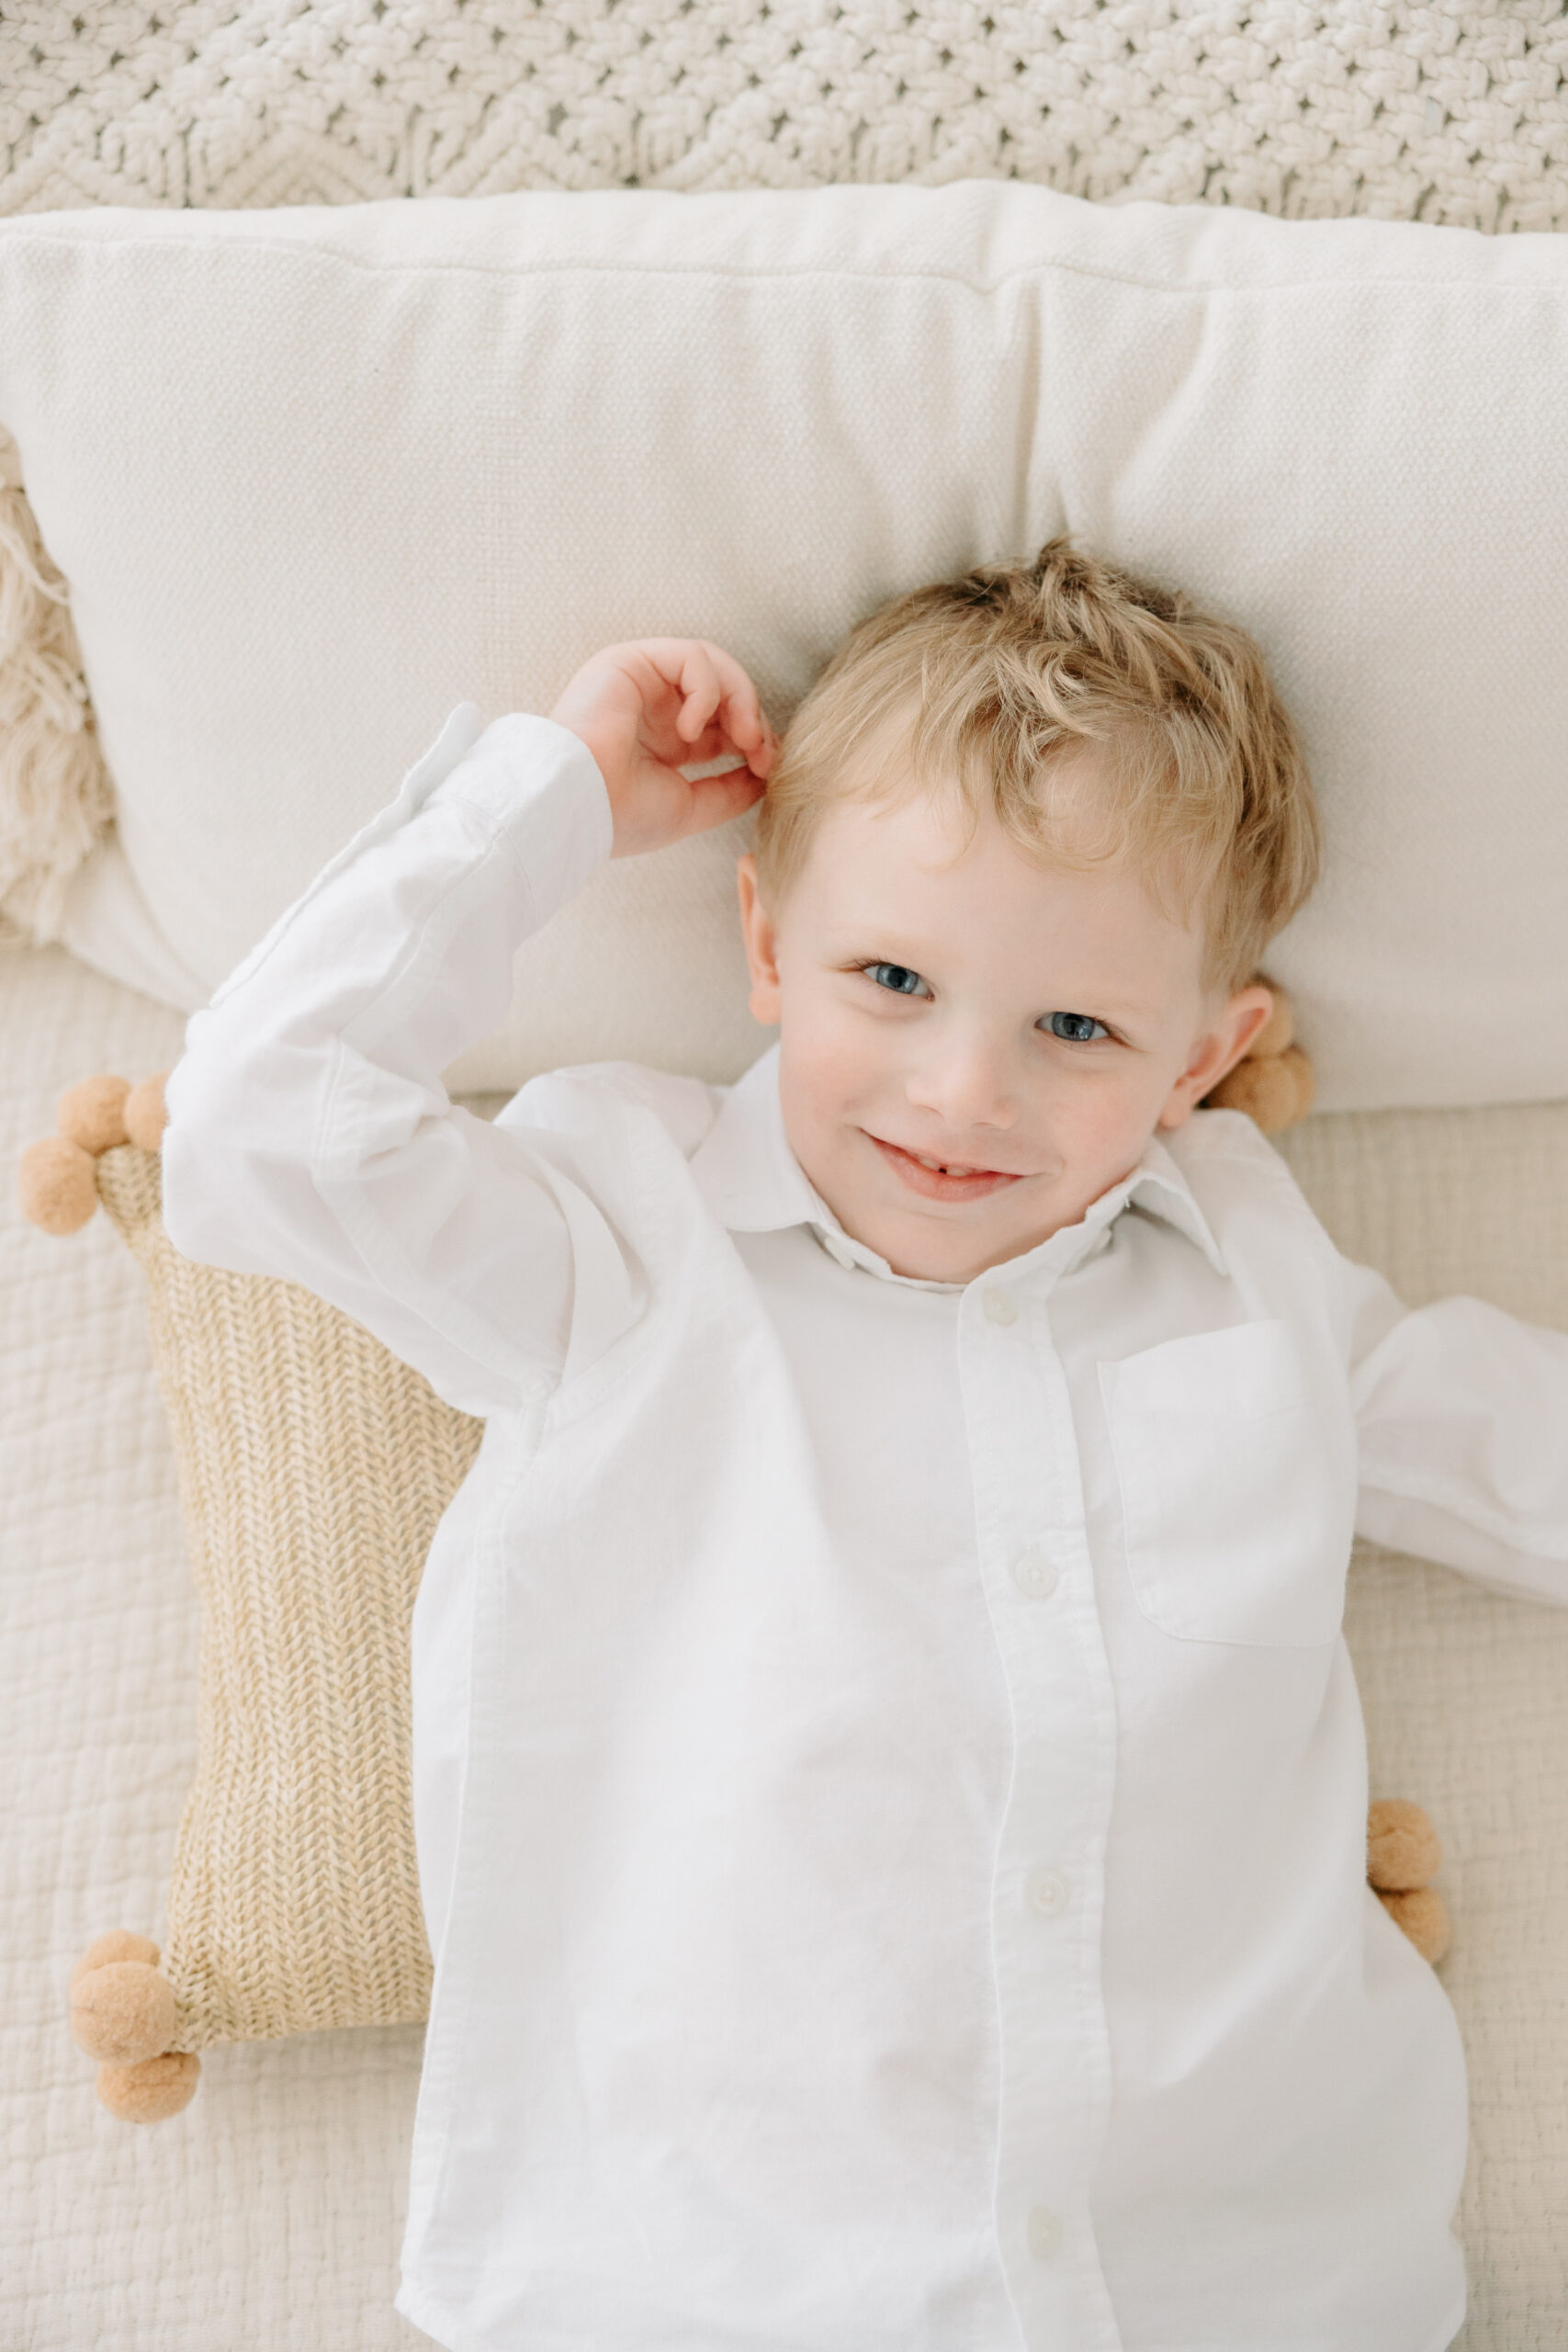 Newborn session with toddler | toddler boy poses on a white bed and smiles at the camera